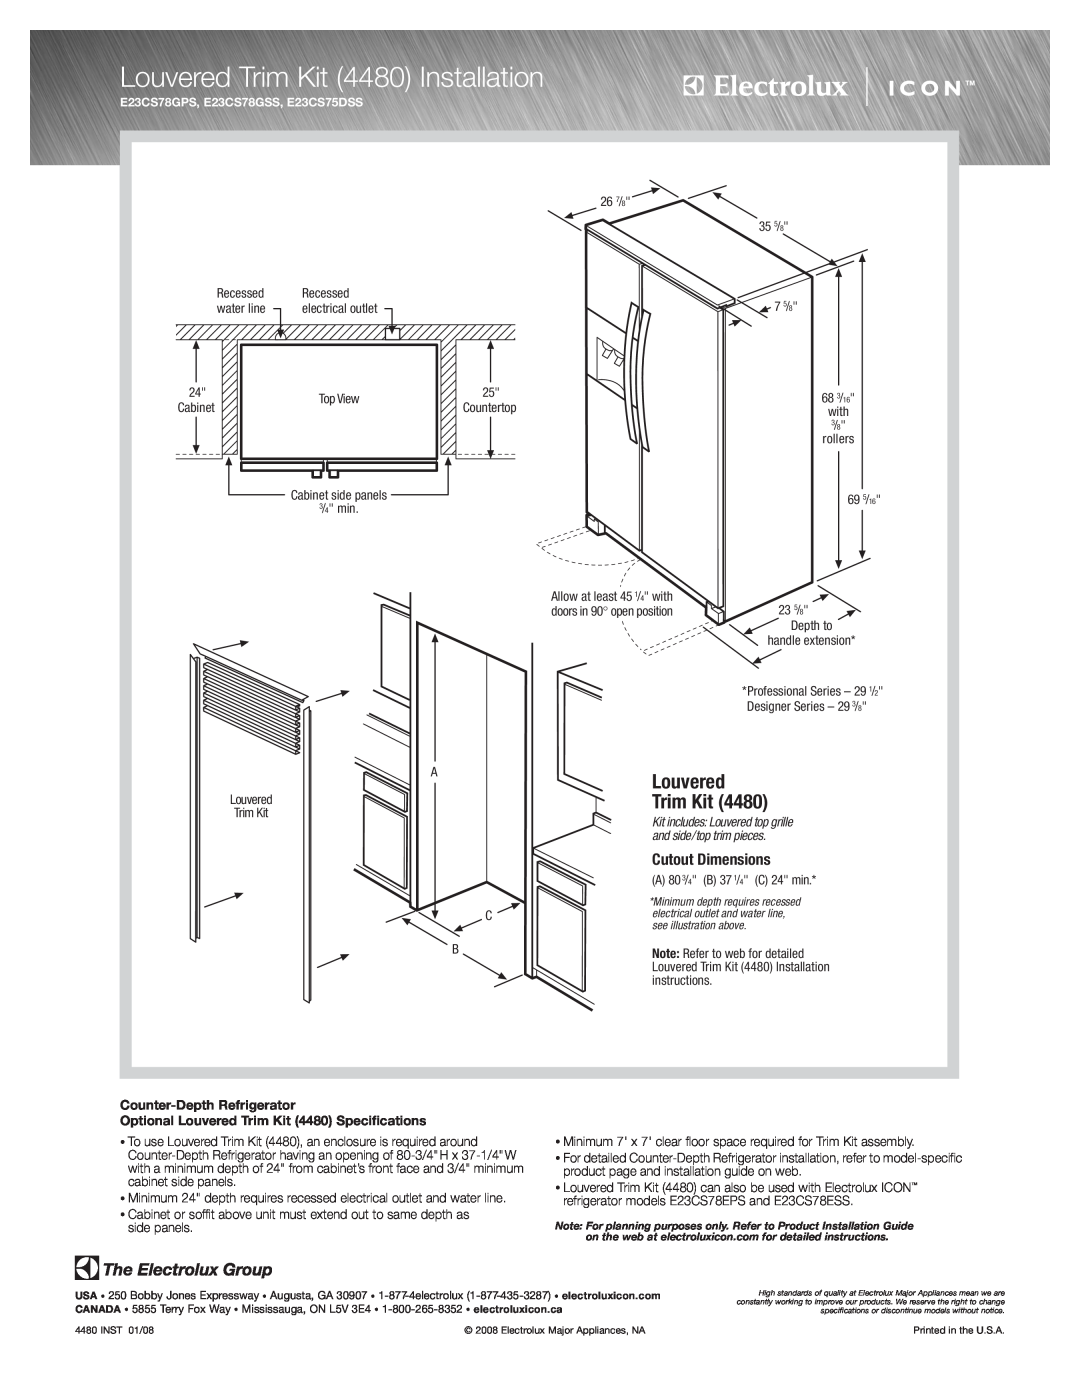 Electrolux E23CS78GSS specifications Louvered Trim Kit 4480 Installation, Cutout Dimensions, Counter-Depth Refrigerator 